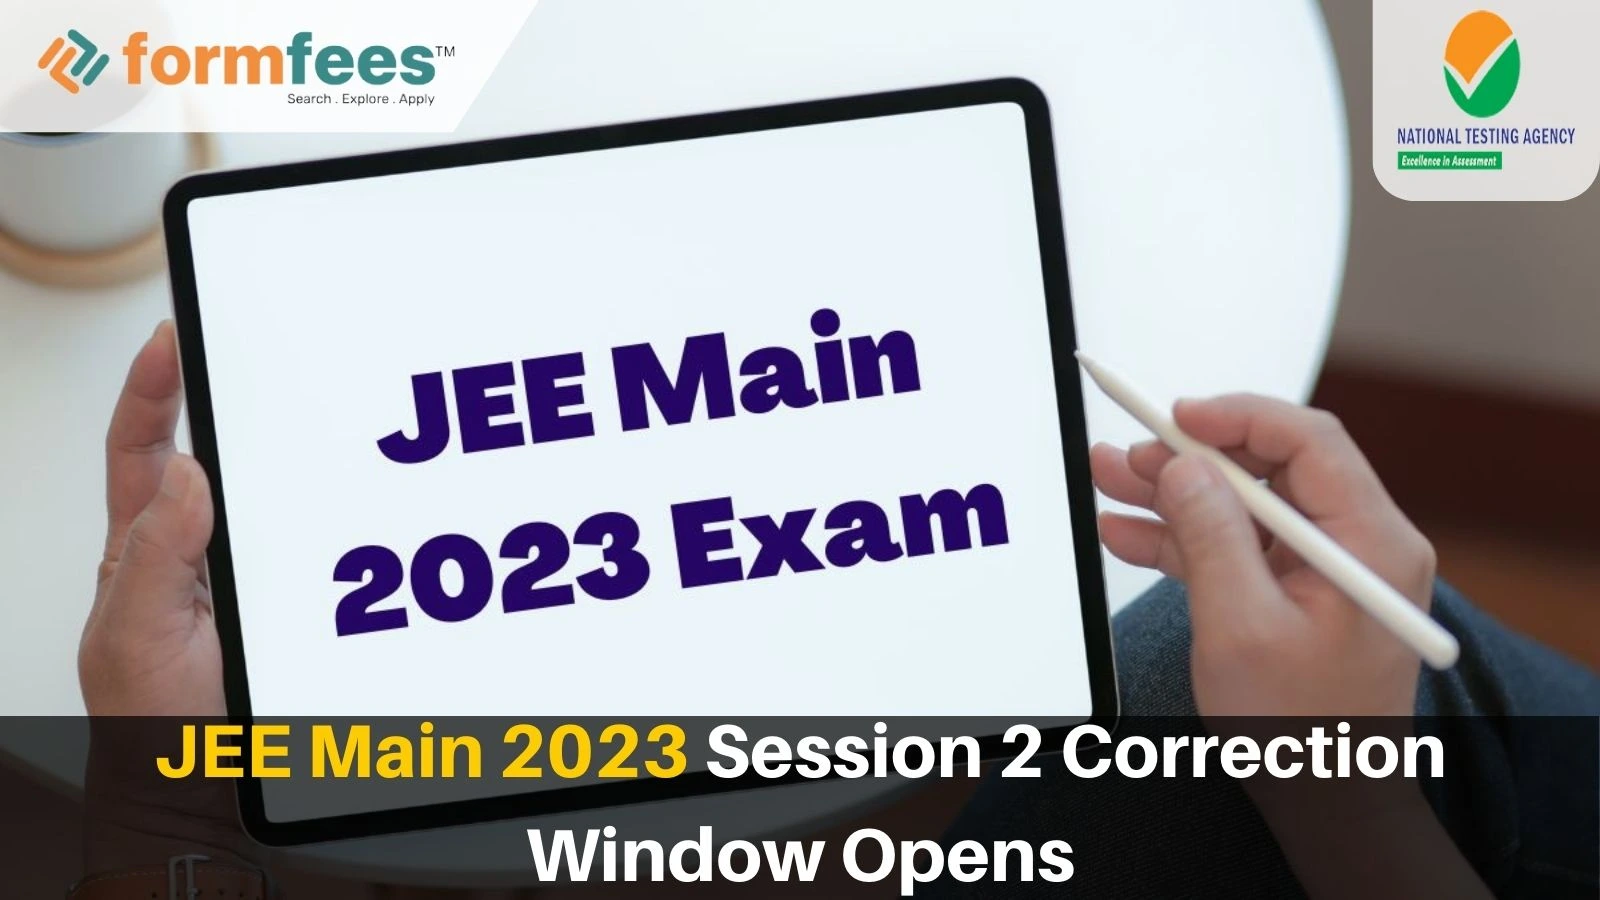 JEE Main 2023 Session 2 Correction Window Opens